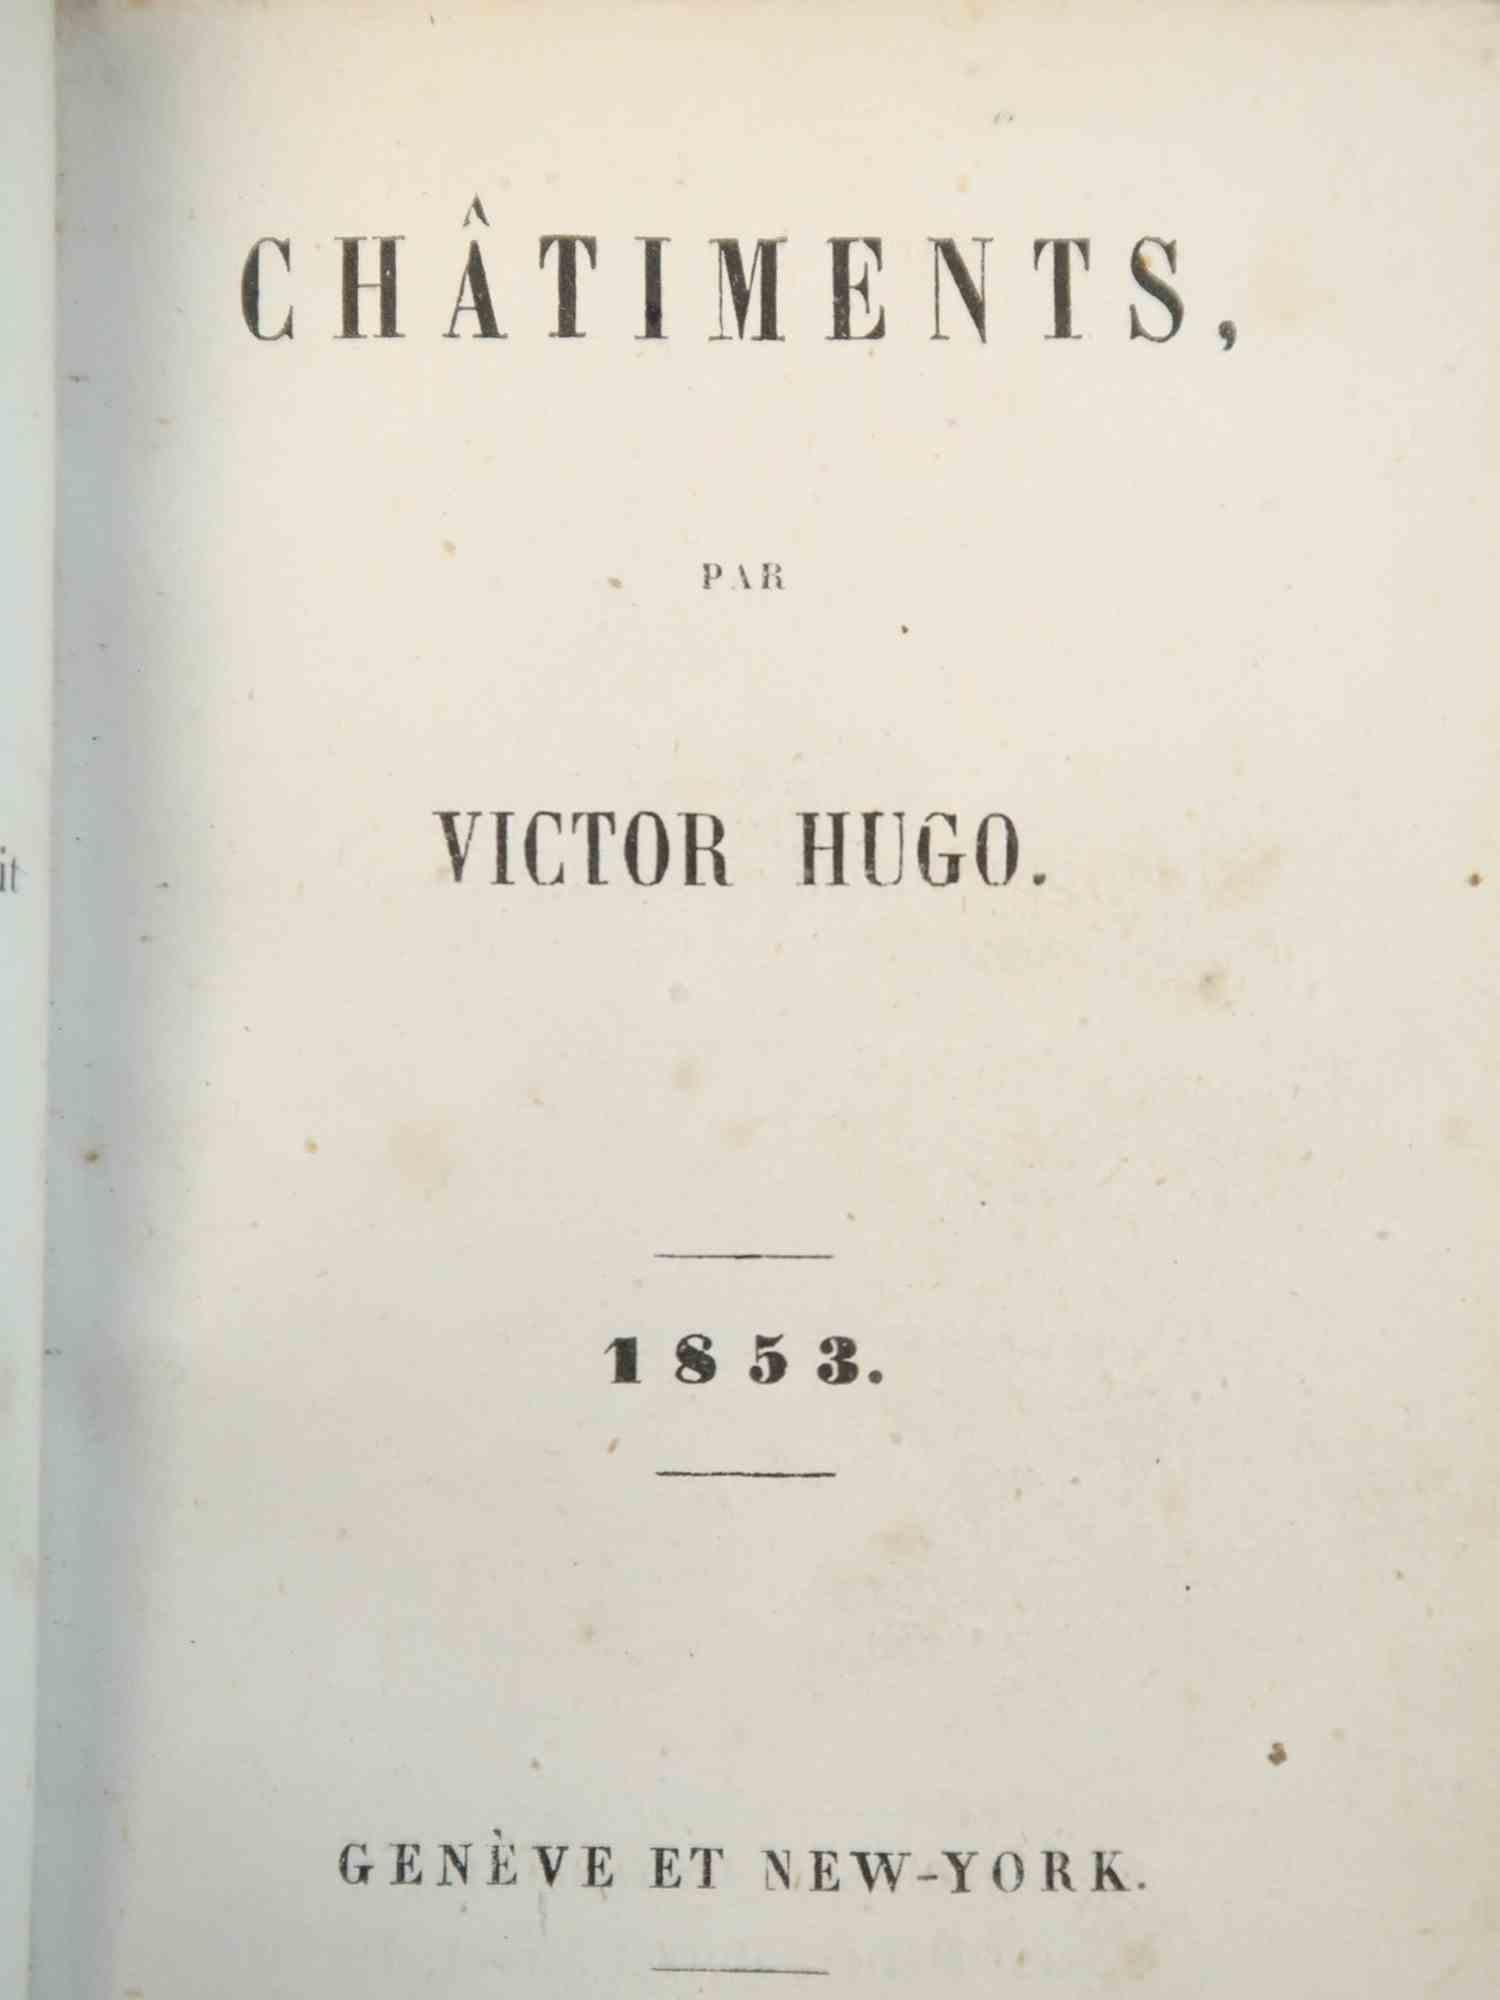 Châtiments - Rare Book by Victor Hugo - 1853 For Sale 3